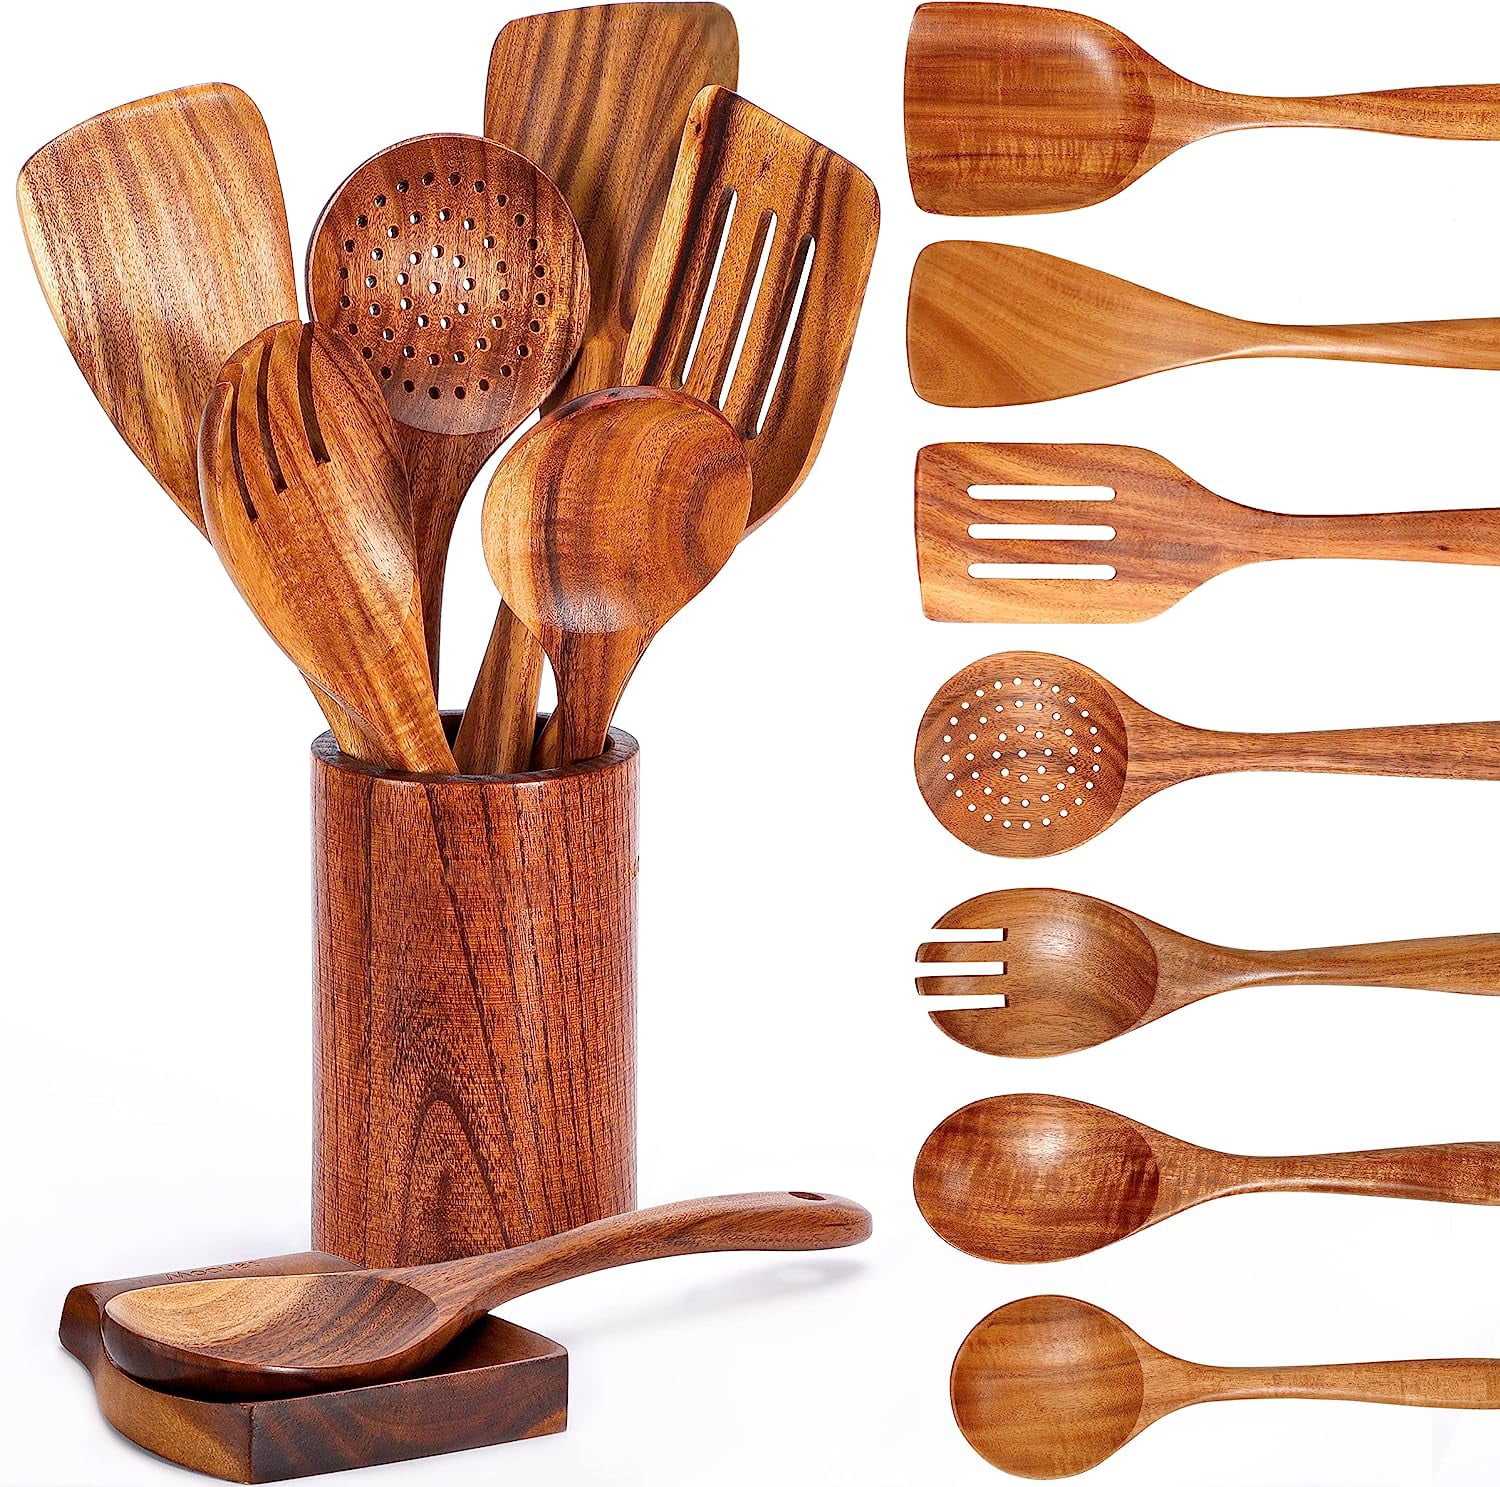 OXO Softworks 3 Piece Wooden Spoon Set